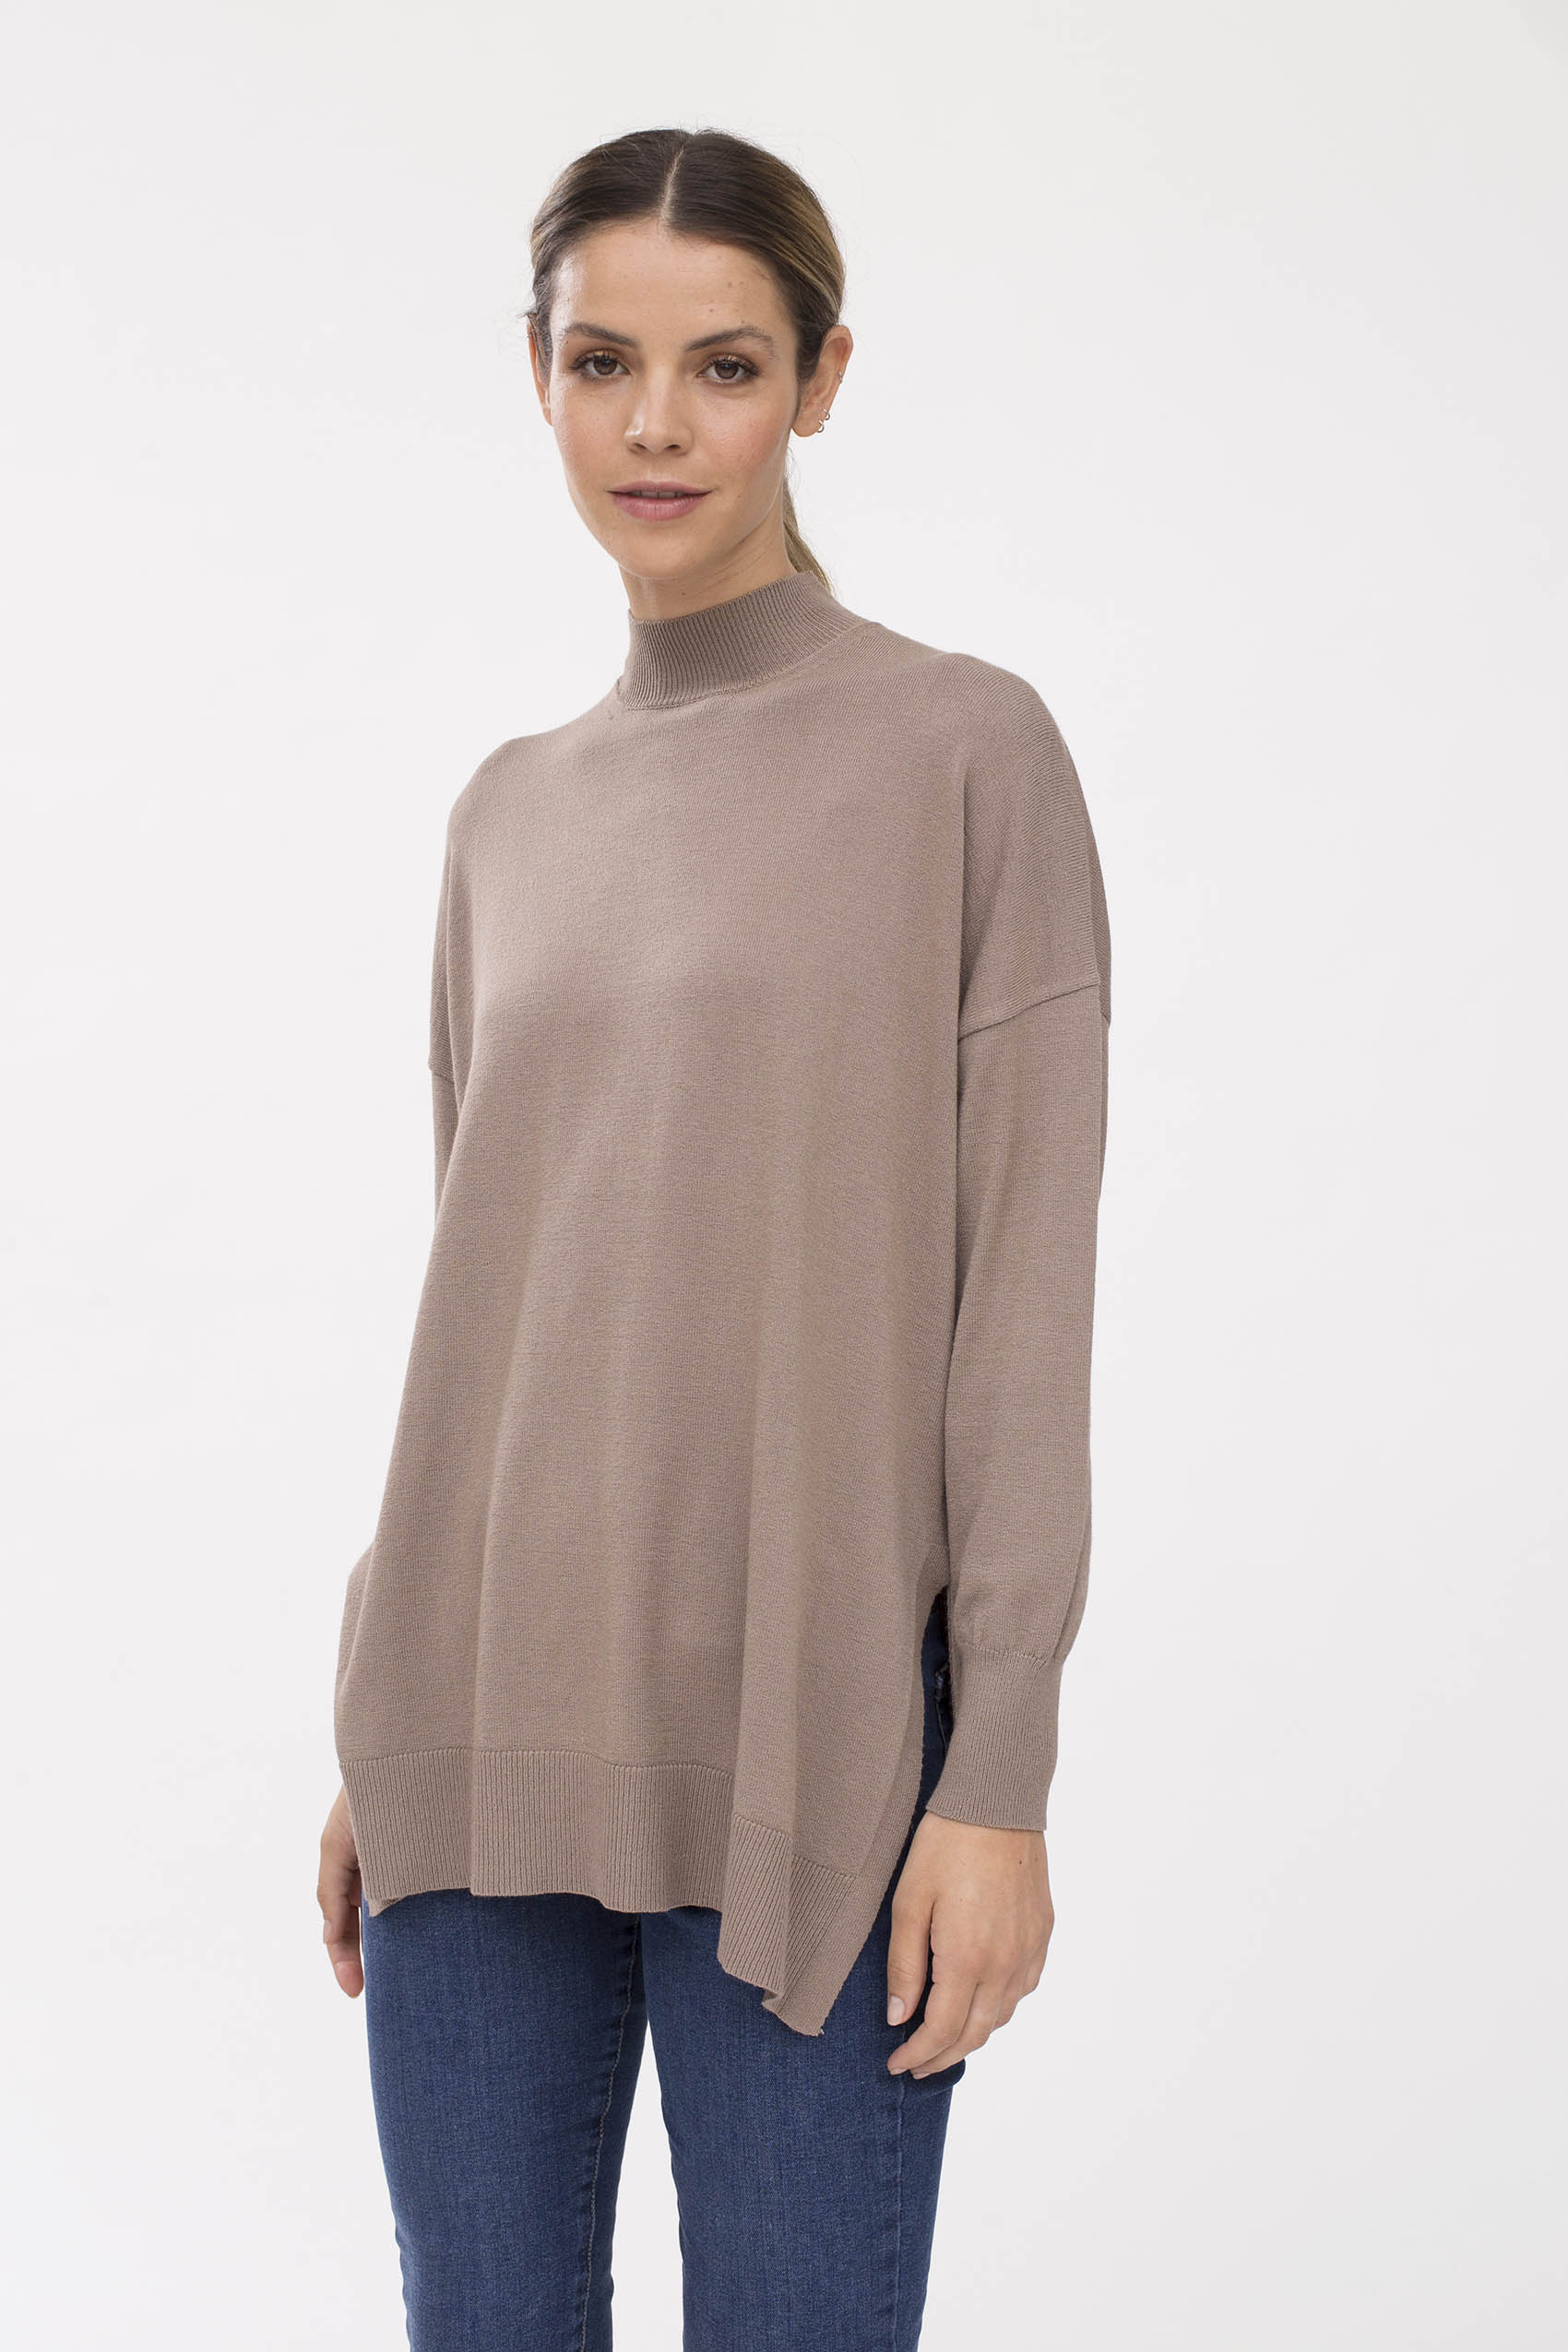 awada_sweater-duval-_59-06-2022__picture-31438